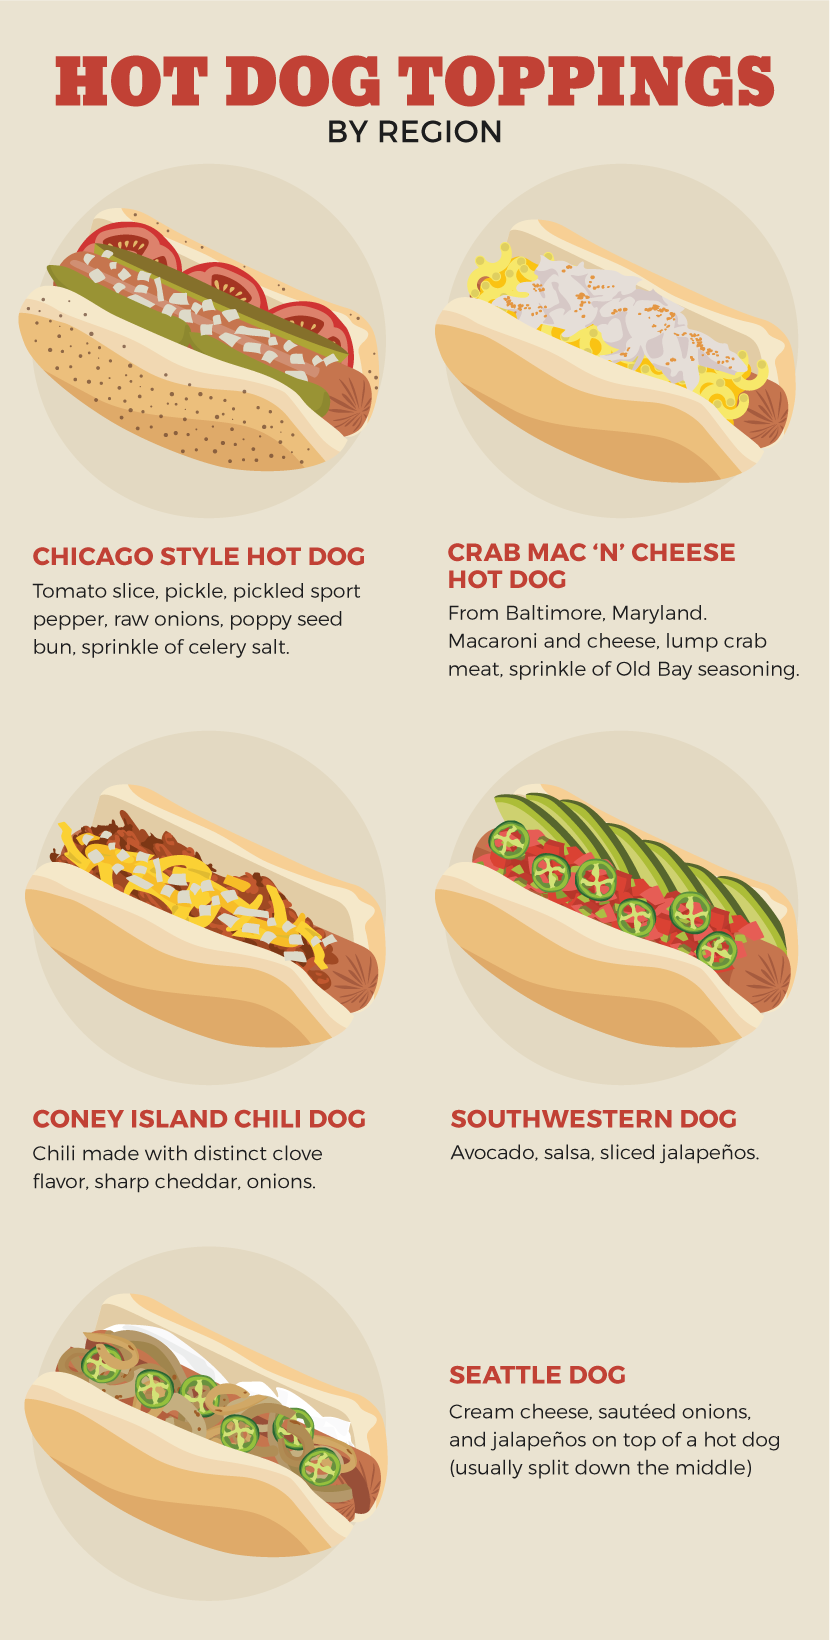 Hot Dog Toppings By Region - Gourmet Hot Dogs By Region